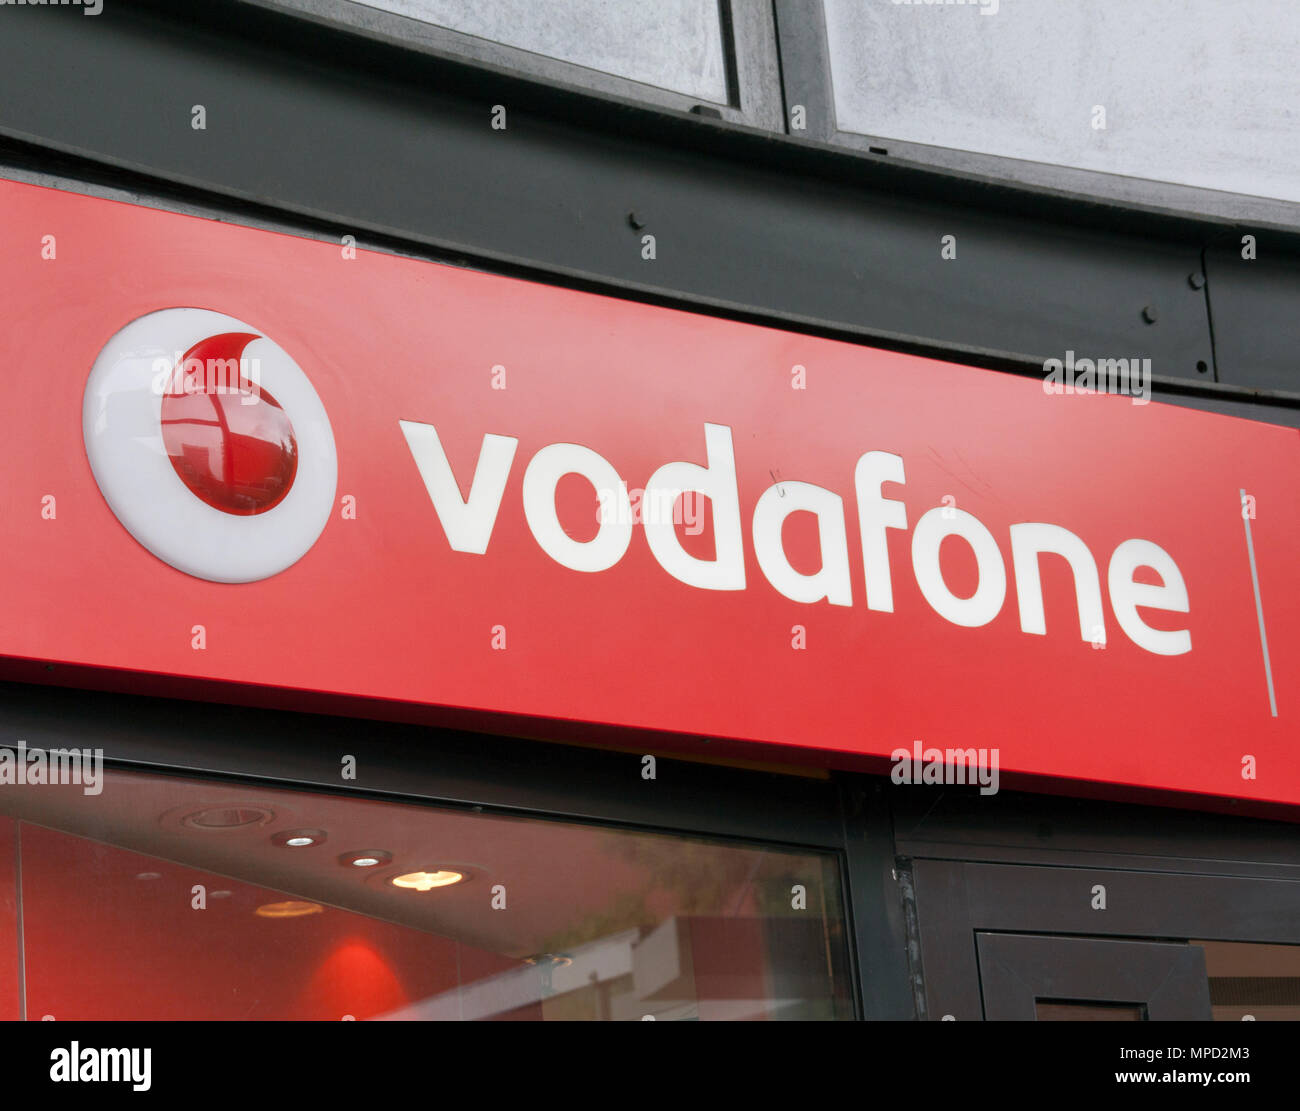 Amsterdam , Netherlands-august 18, 2015: Vodafone sign on a wall in Amsterdam Stock Photo